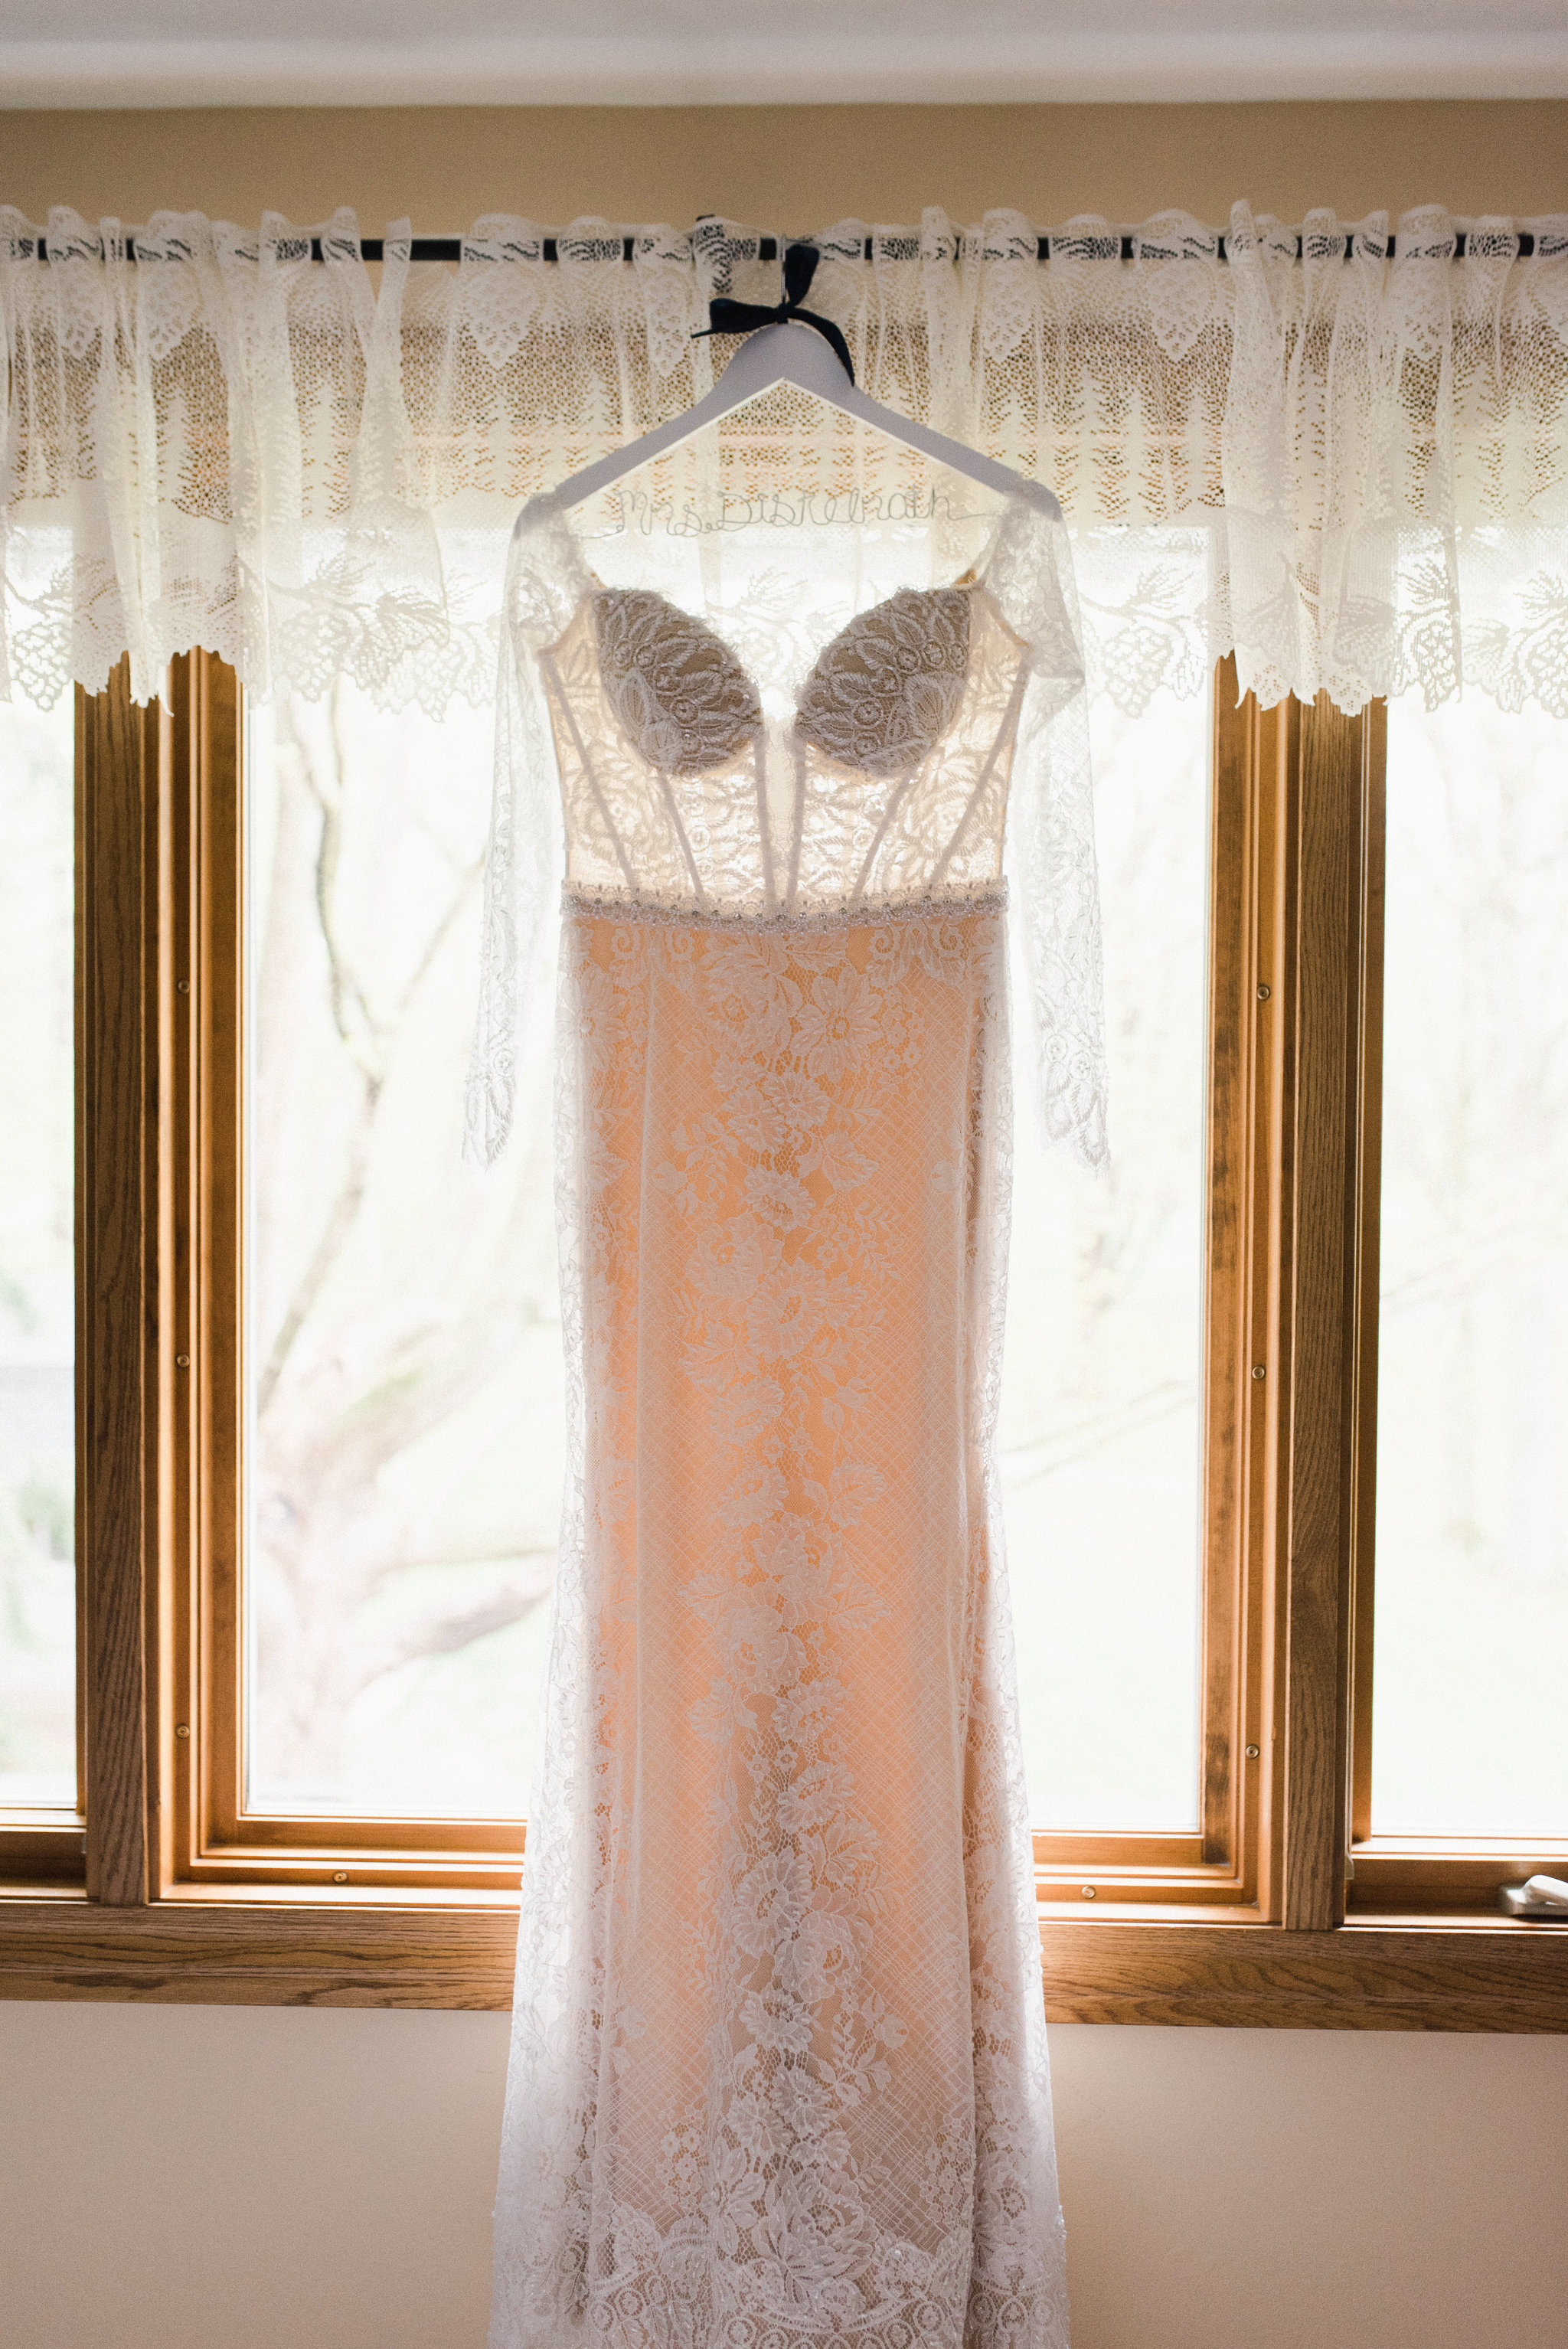 A Vintage-Inspired Packard Proving Grounds Michigan Wedding - The Overwhelmed Bride Wedding Blog